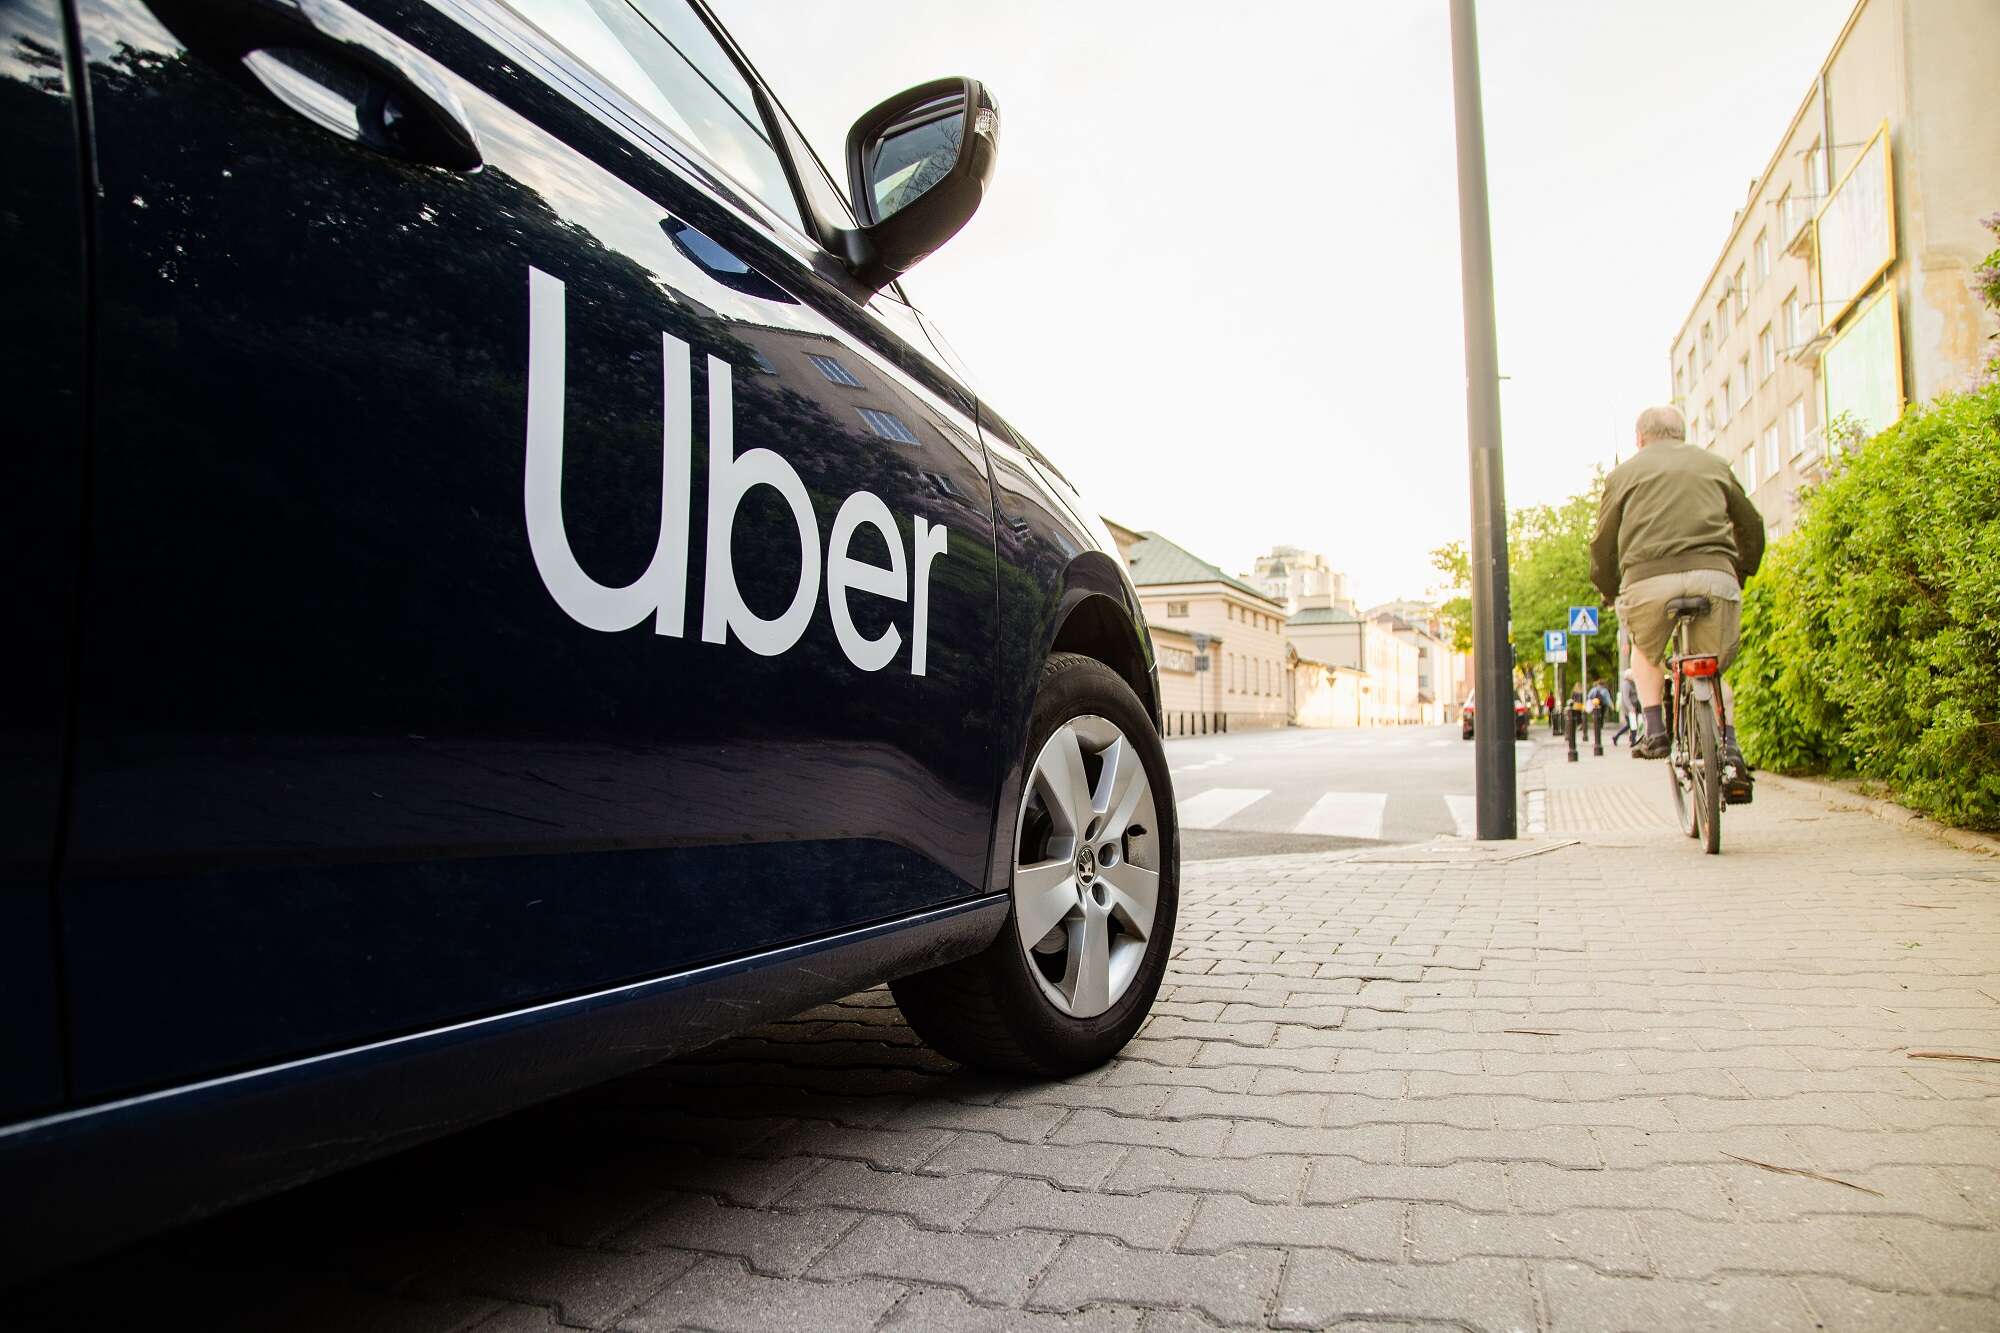 Uber wants to become a platform for public transport systems